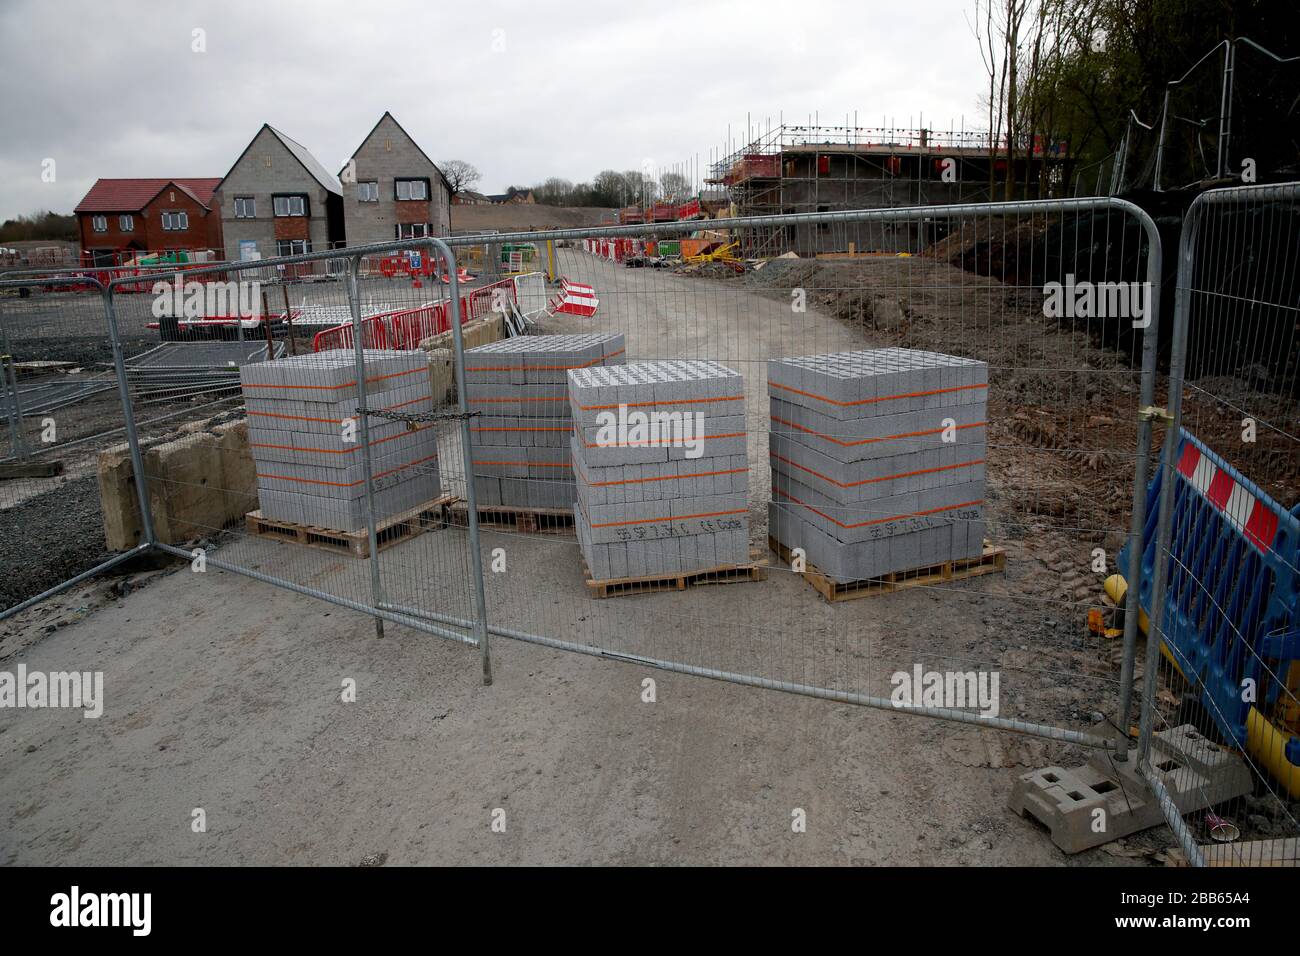 A Taylor Wimpey housing development in Telford where building work has ceased as the UK continues in lockdown to help curb the spread of the coronavirus. Stock Photo